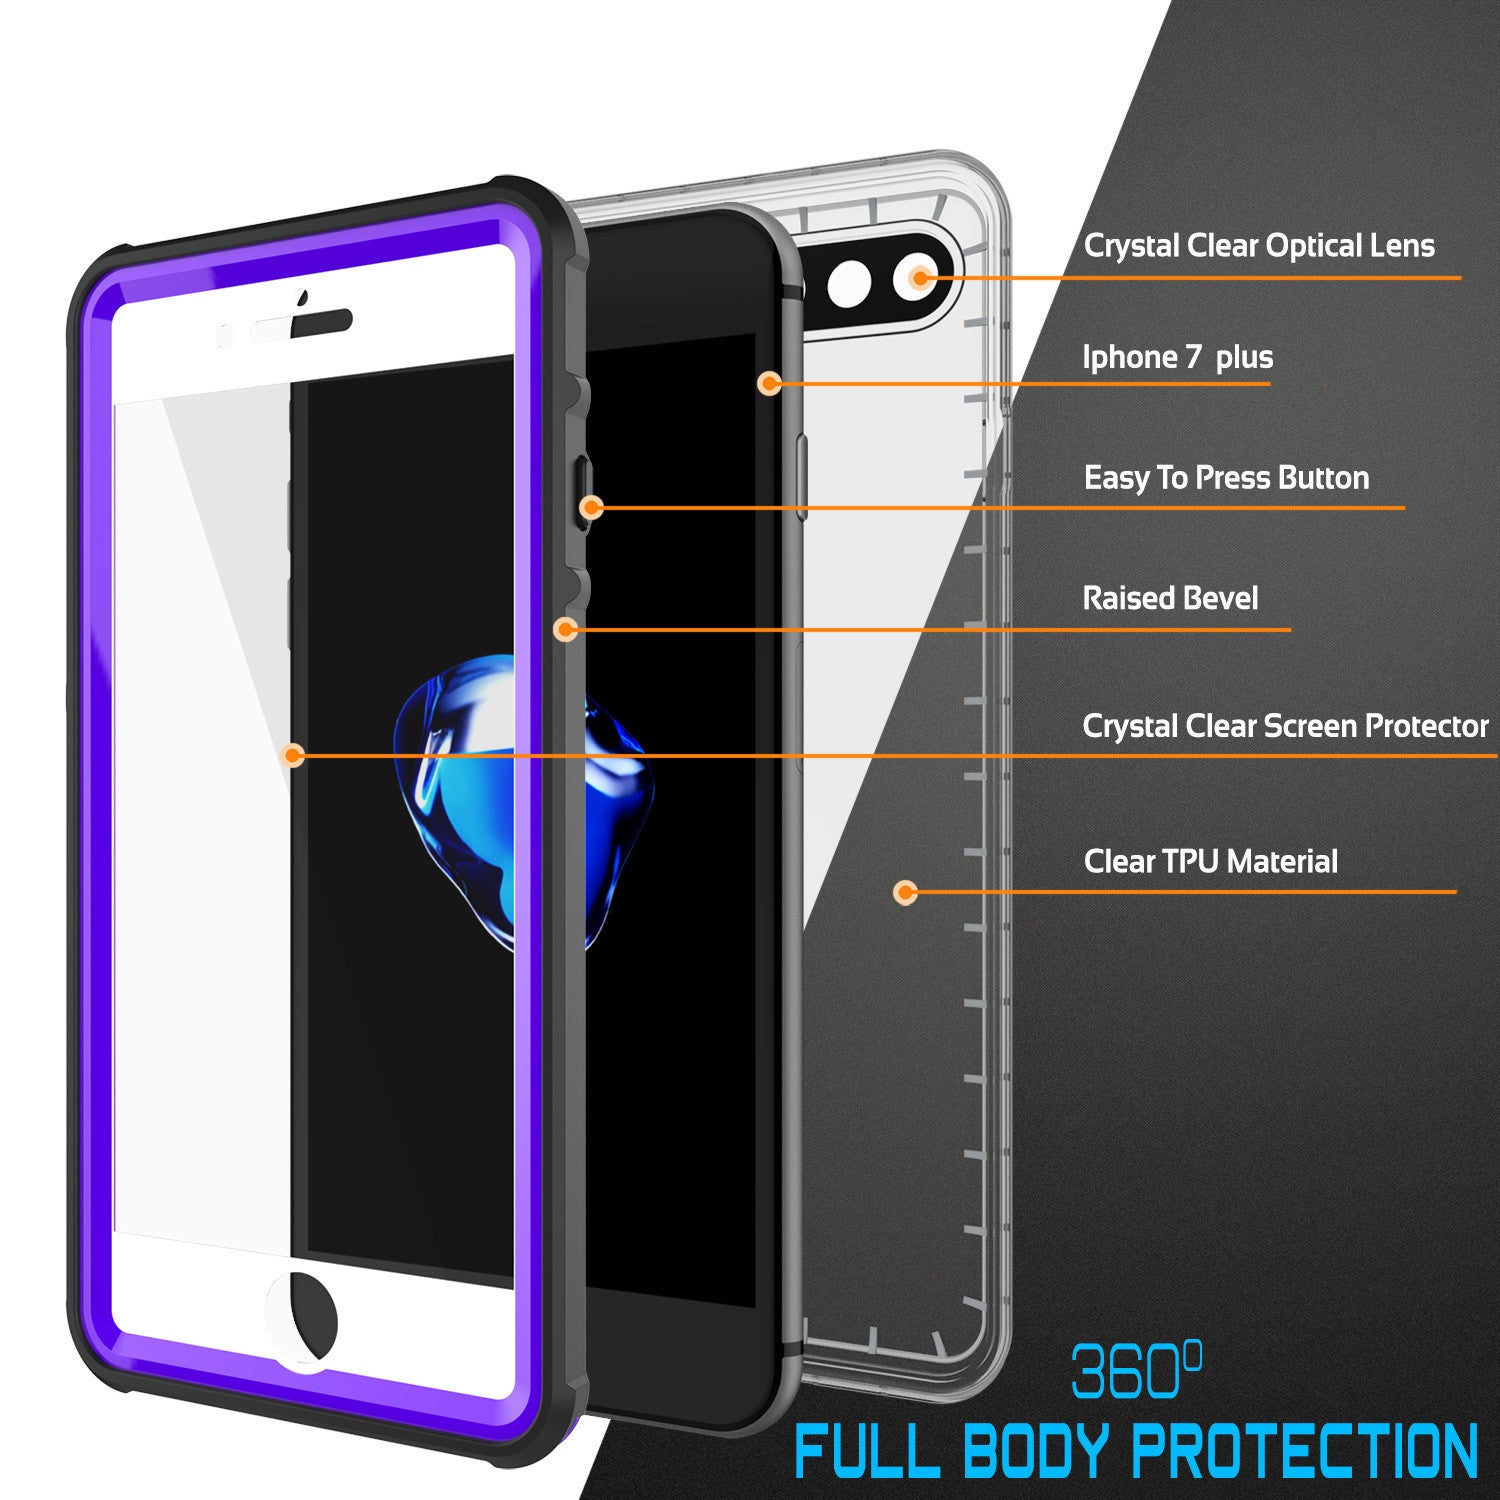 iPhone 7+ Plus Waterproof Case, PUNKcase CRYSTAL Purple W/ Attached Screen Protector | Warranty